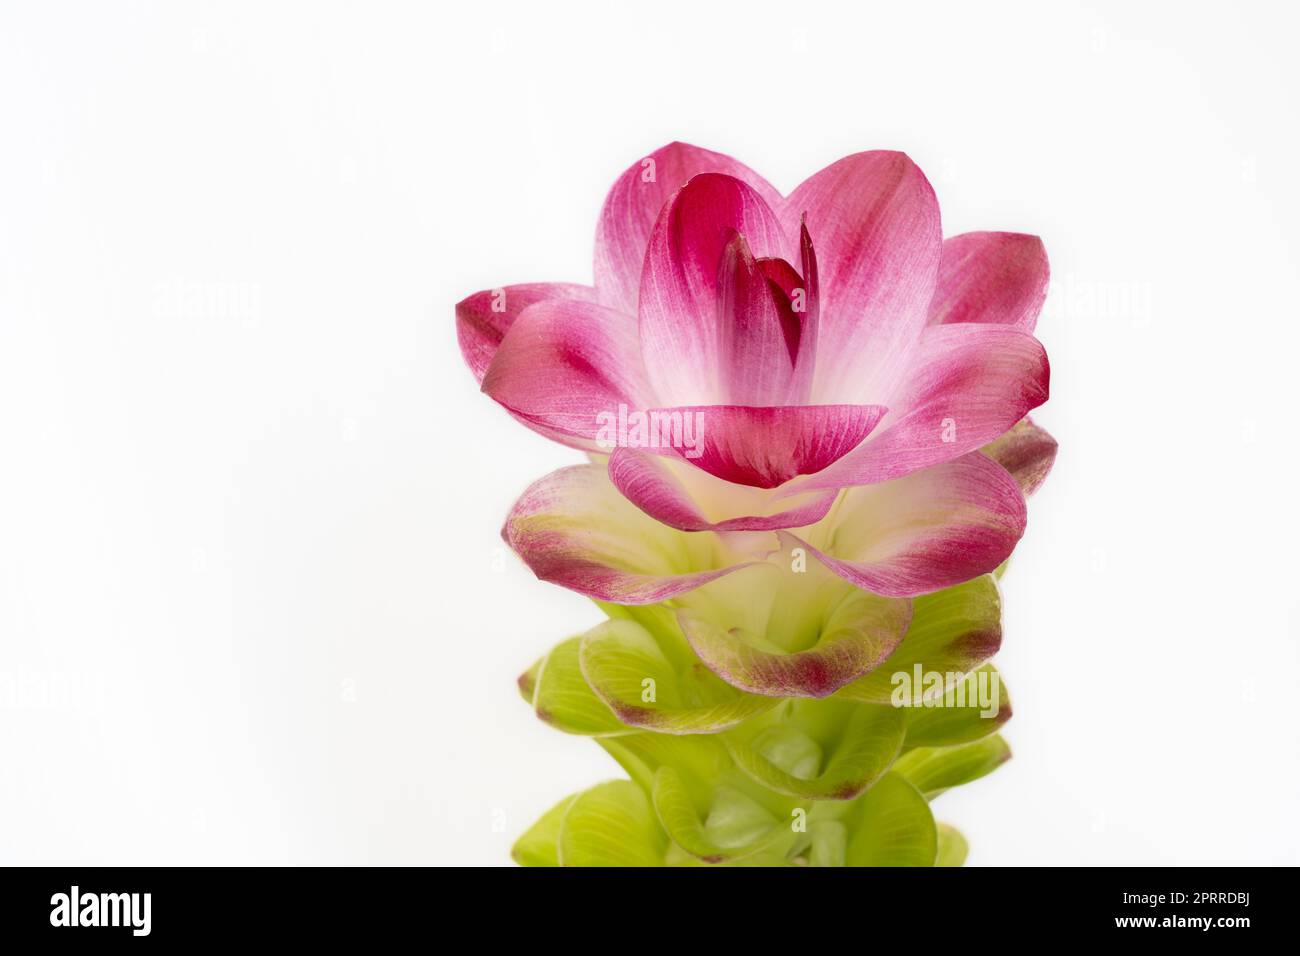 Closeup view of fresh green and purple red flower of curcuma aromatica or wild turmeric isolated on white background Stock Photo